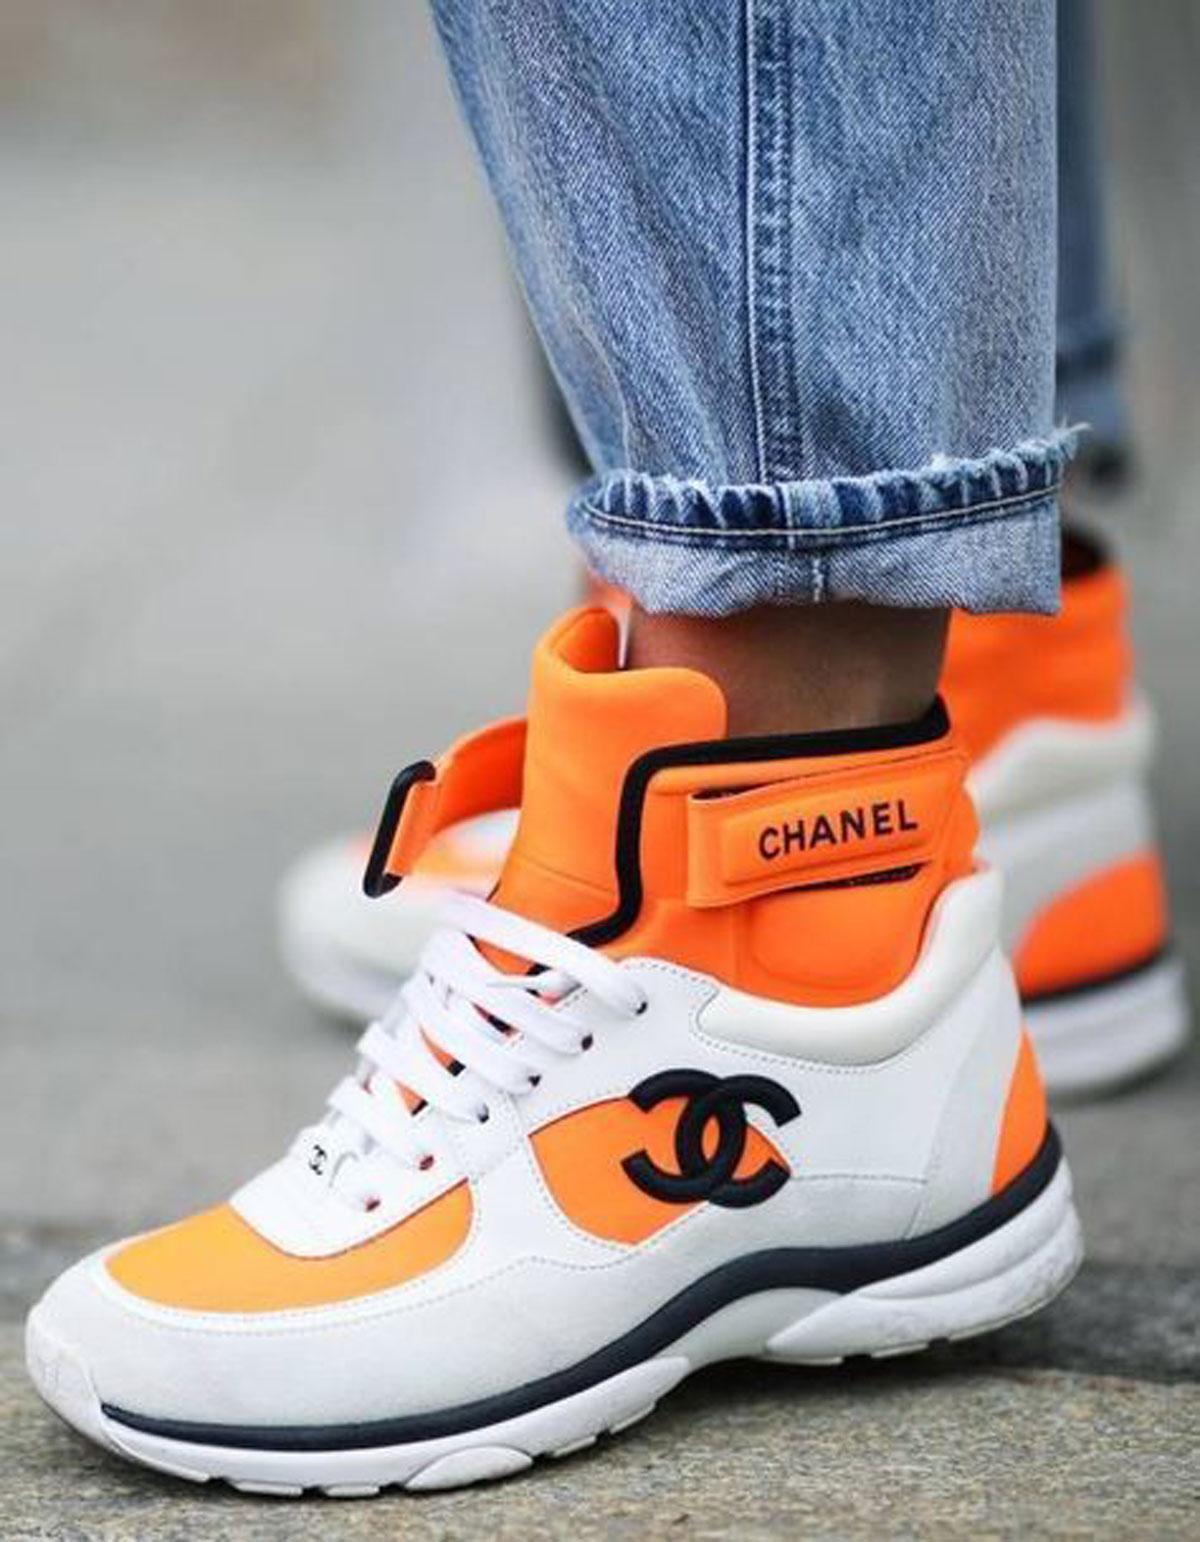 Suede Calfskin Lambskin Neoprene High Top CC Sneakers 40 White Fluo Orange

White leather
Light grey suede
Orange neoprene trim throughout
Black Chanel CC logos
Velcro ankle straps

Made in Italy

As seen on Kai Gerber and Hailey Bieber